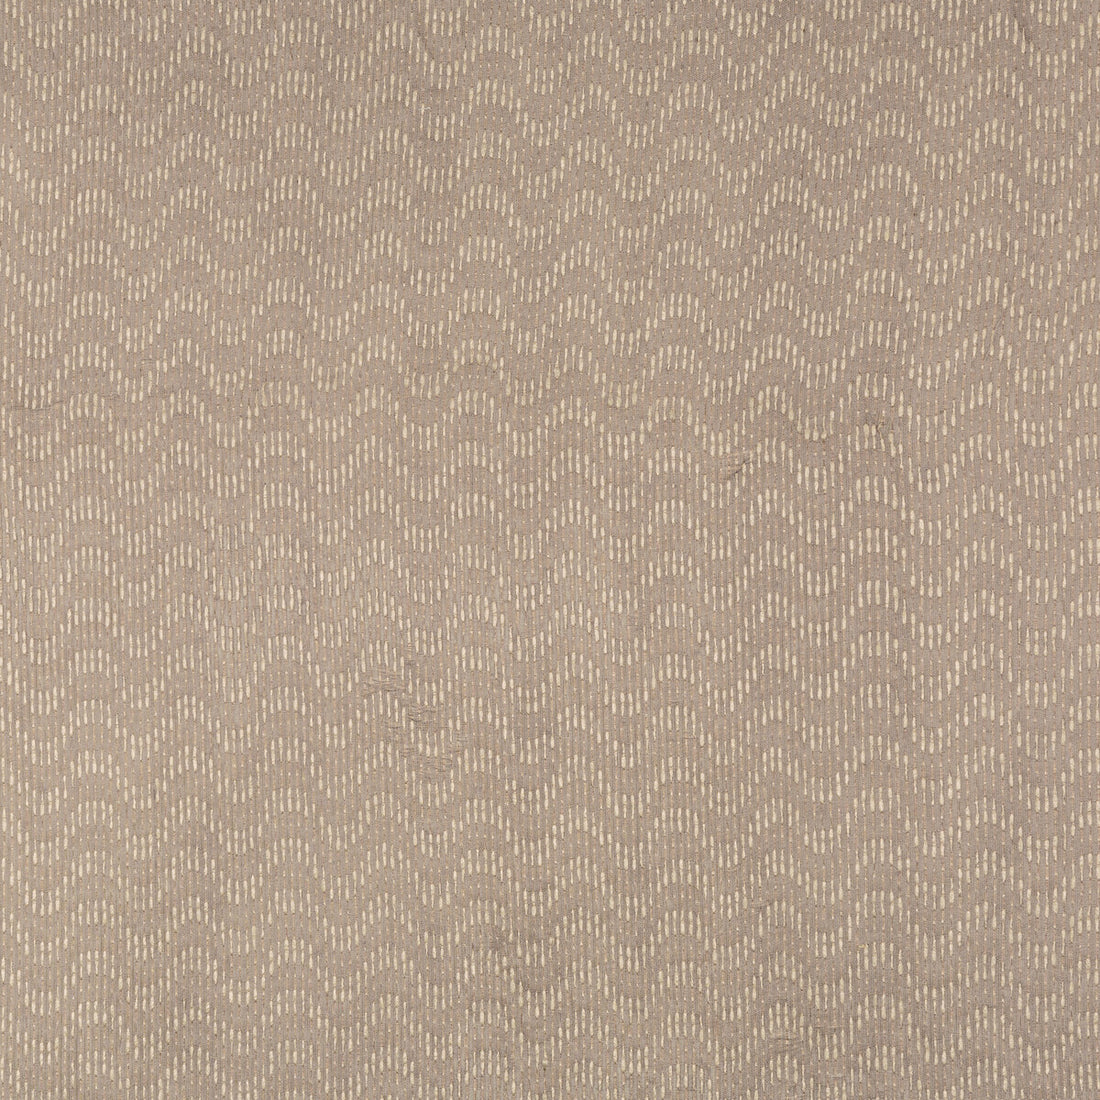 Helius fabric in copper color - pattern 4816.106.0 - by Kravet Contract